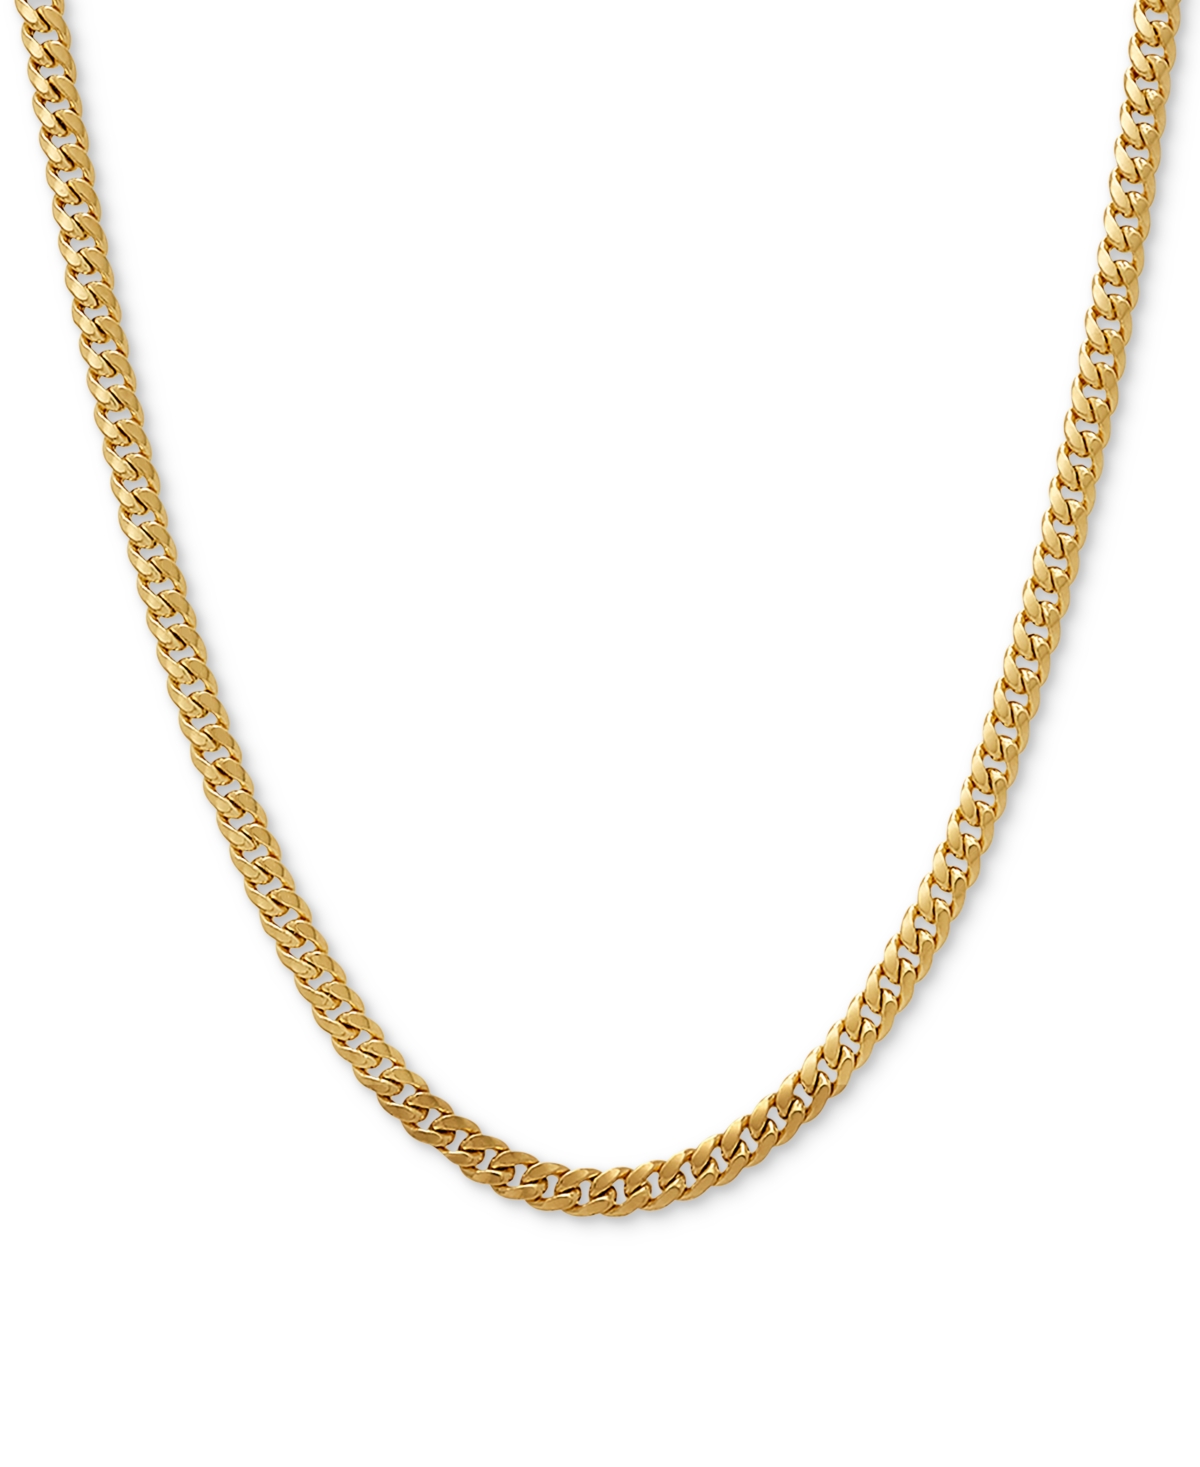 ITALIAN GOLD CURB LINK 22" CHAIN NECKLACE IN 14K GOLD